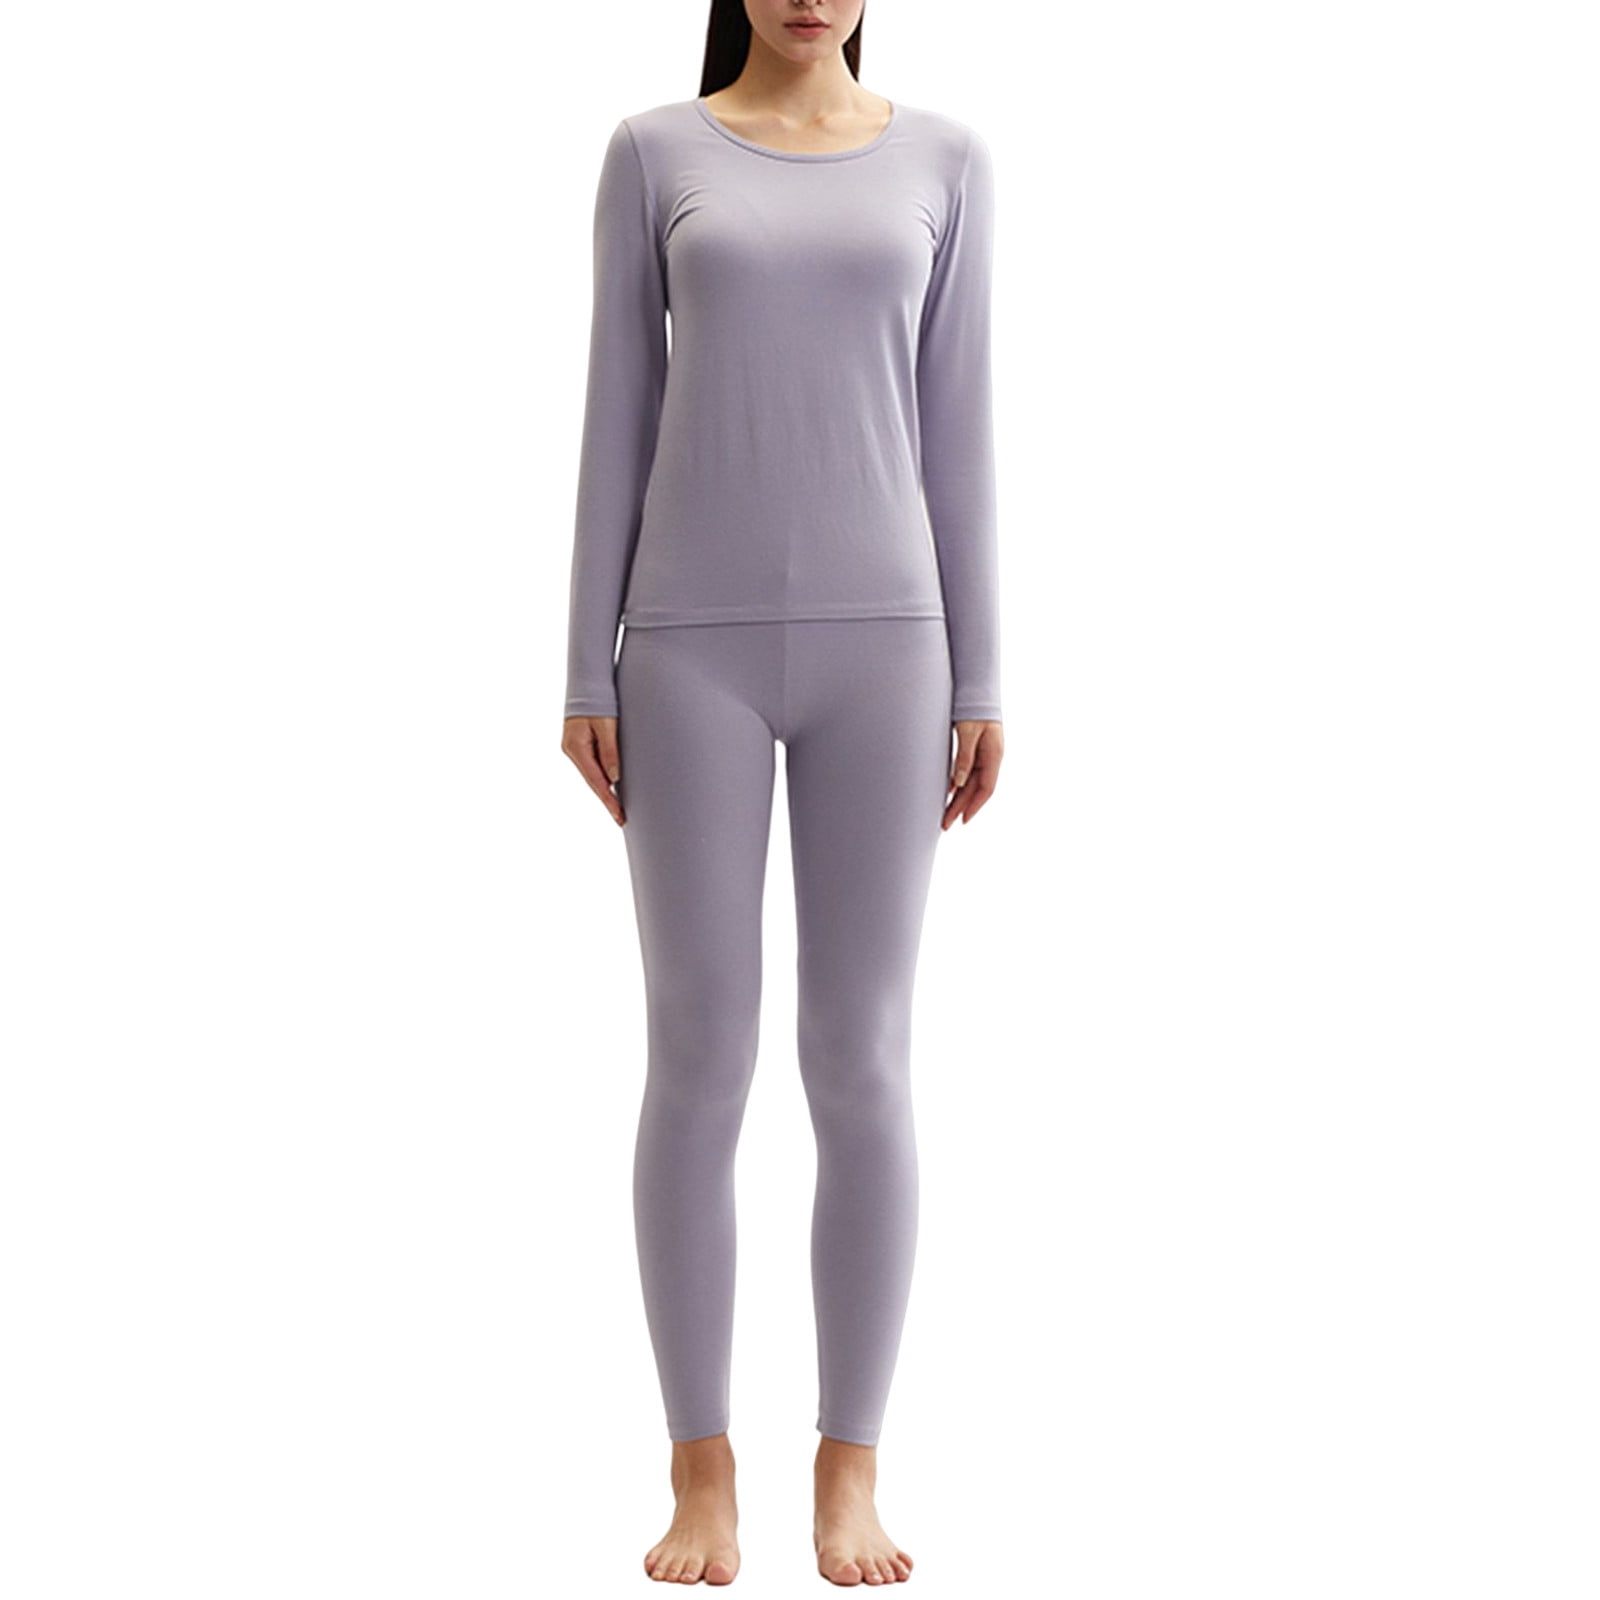 Women's Thermal Underwear Set Pajamas Sets Soft Cozy Long Johns Winter Warm Base  Layer Top & Bottom for Cold Weather 